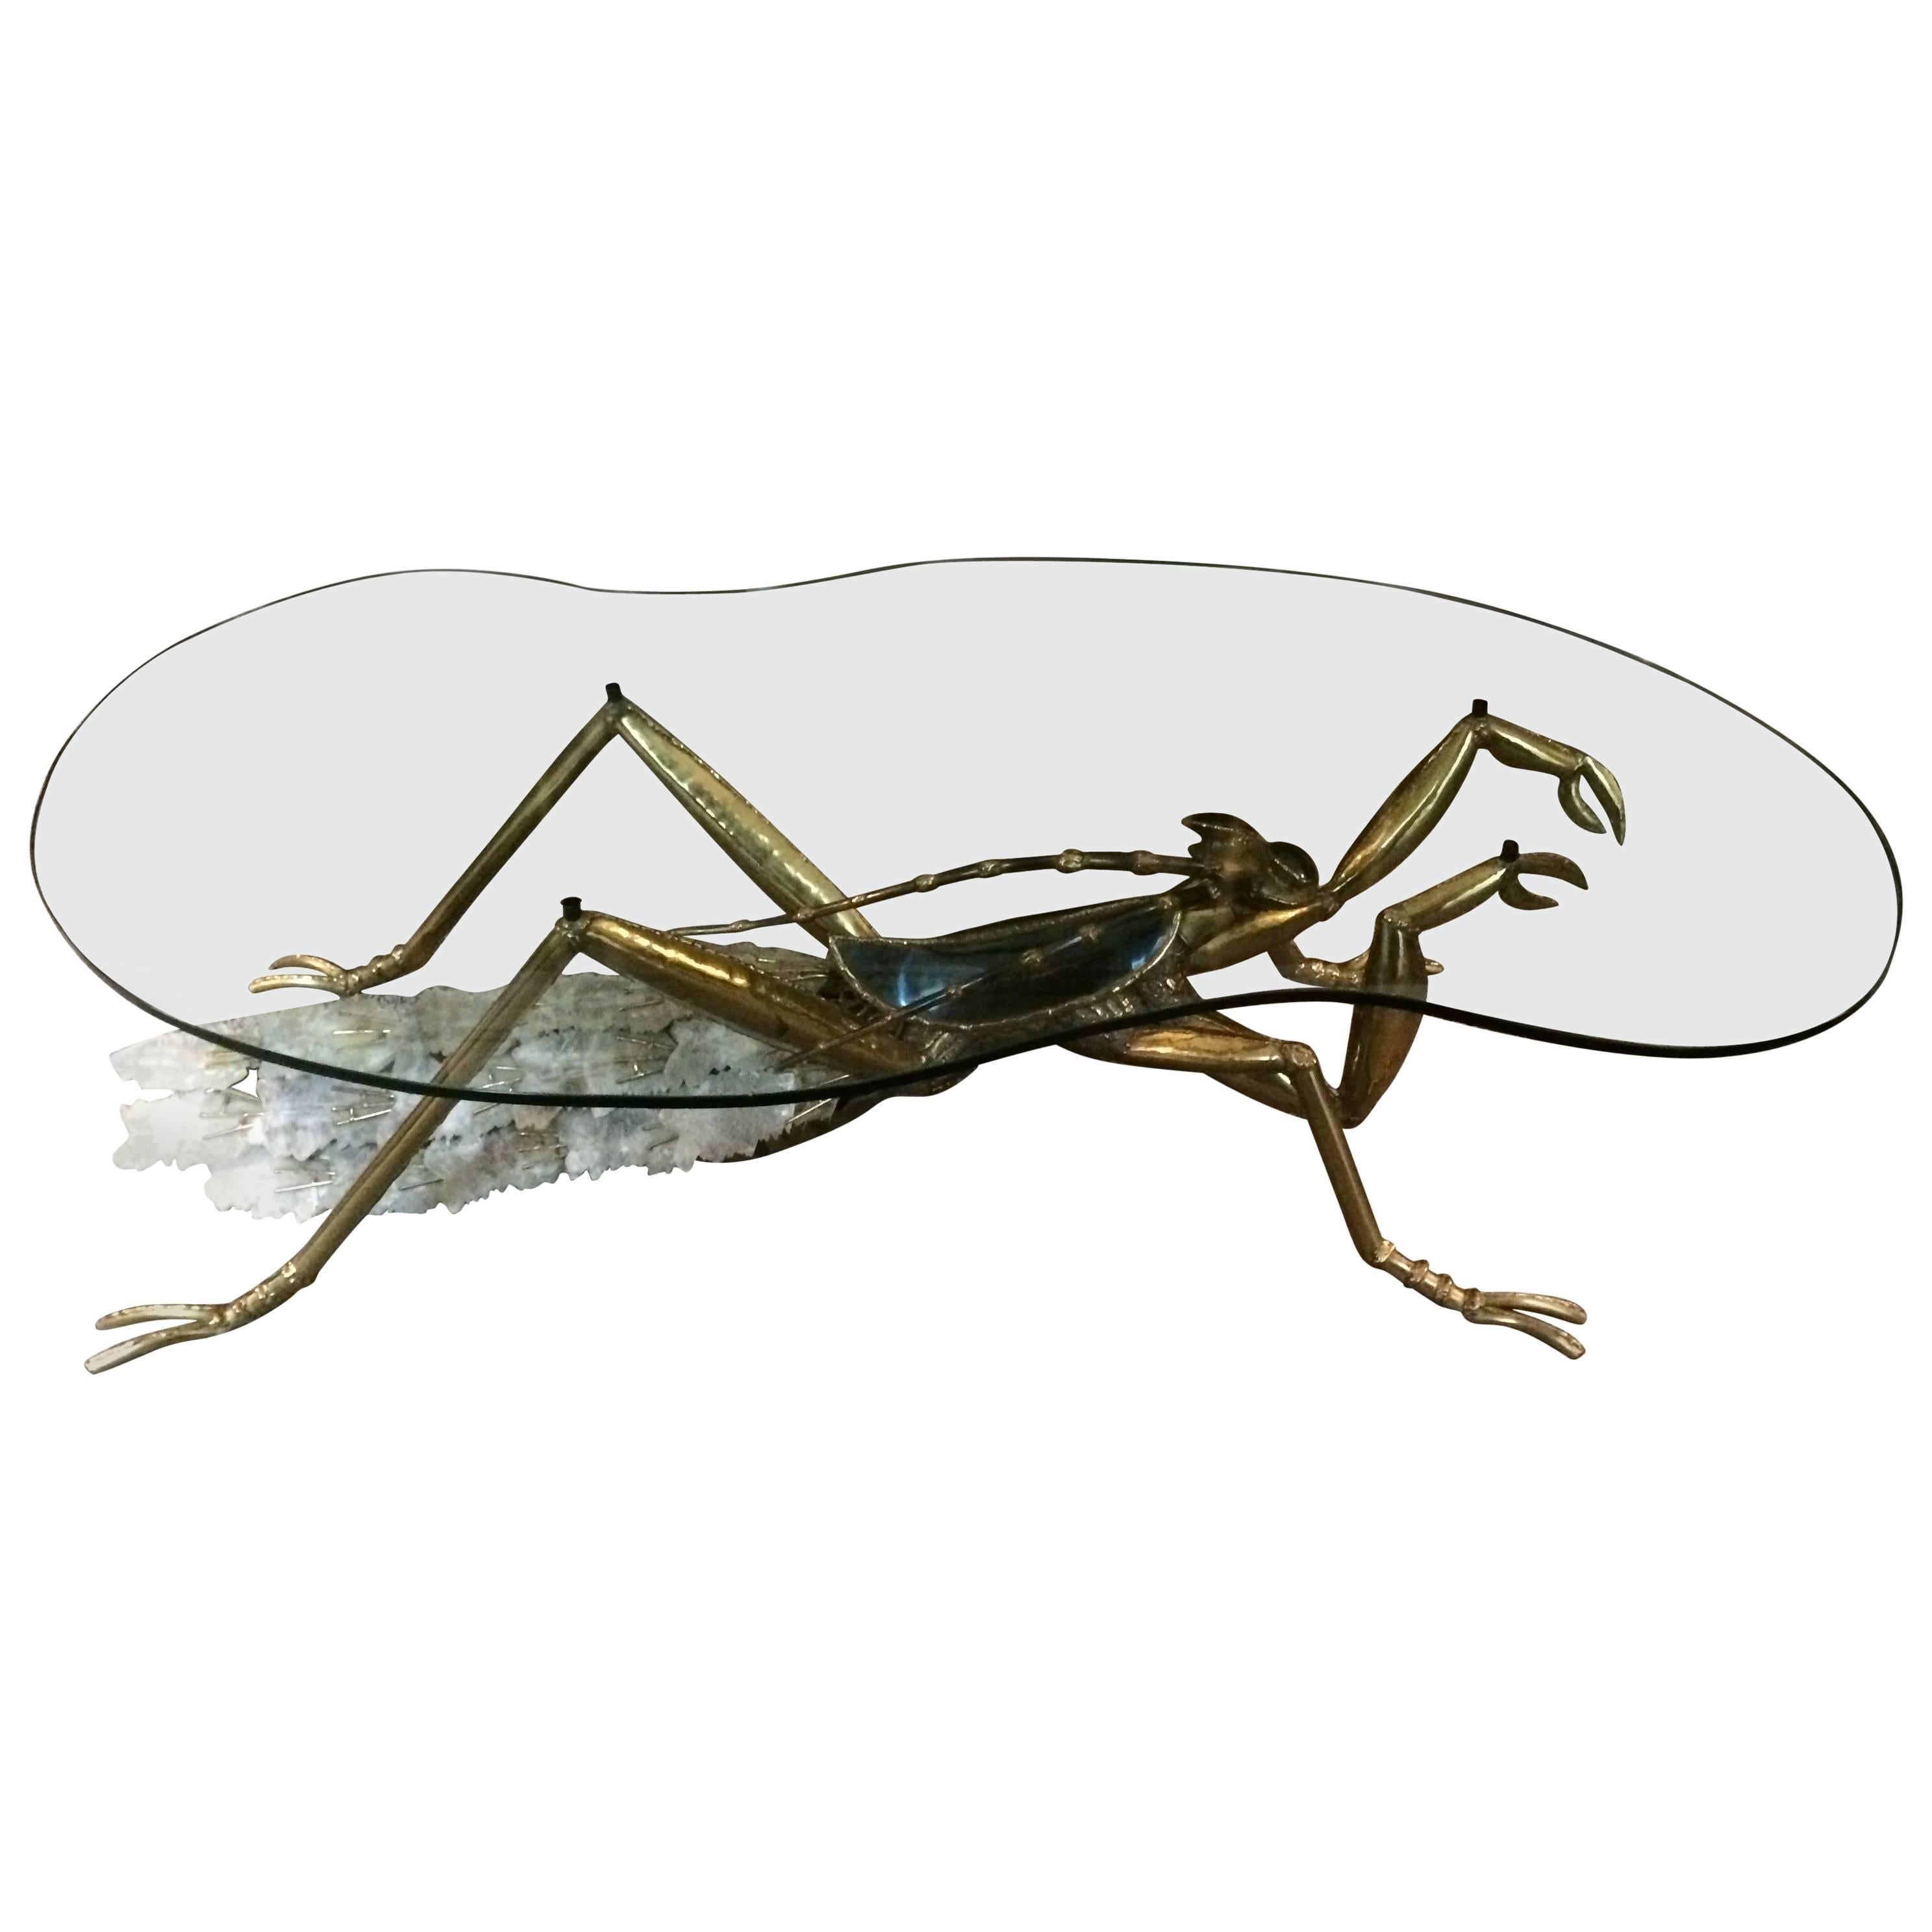 Massive Jacques Duval Brasseur Coffee Table in Form of a Praying Mantis For Sale